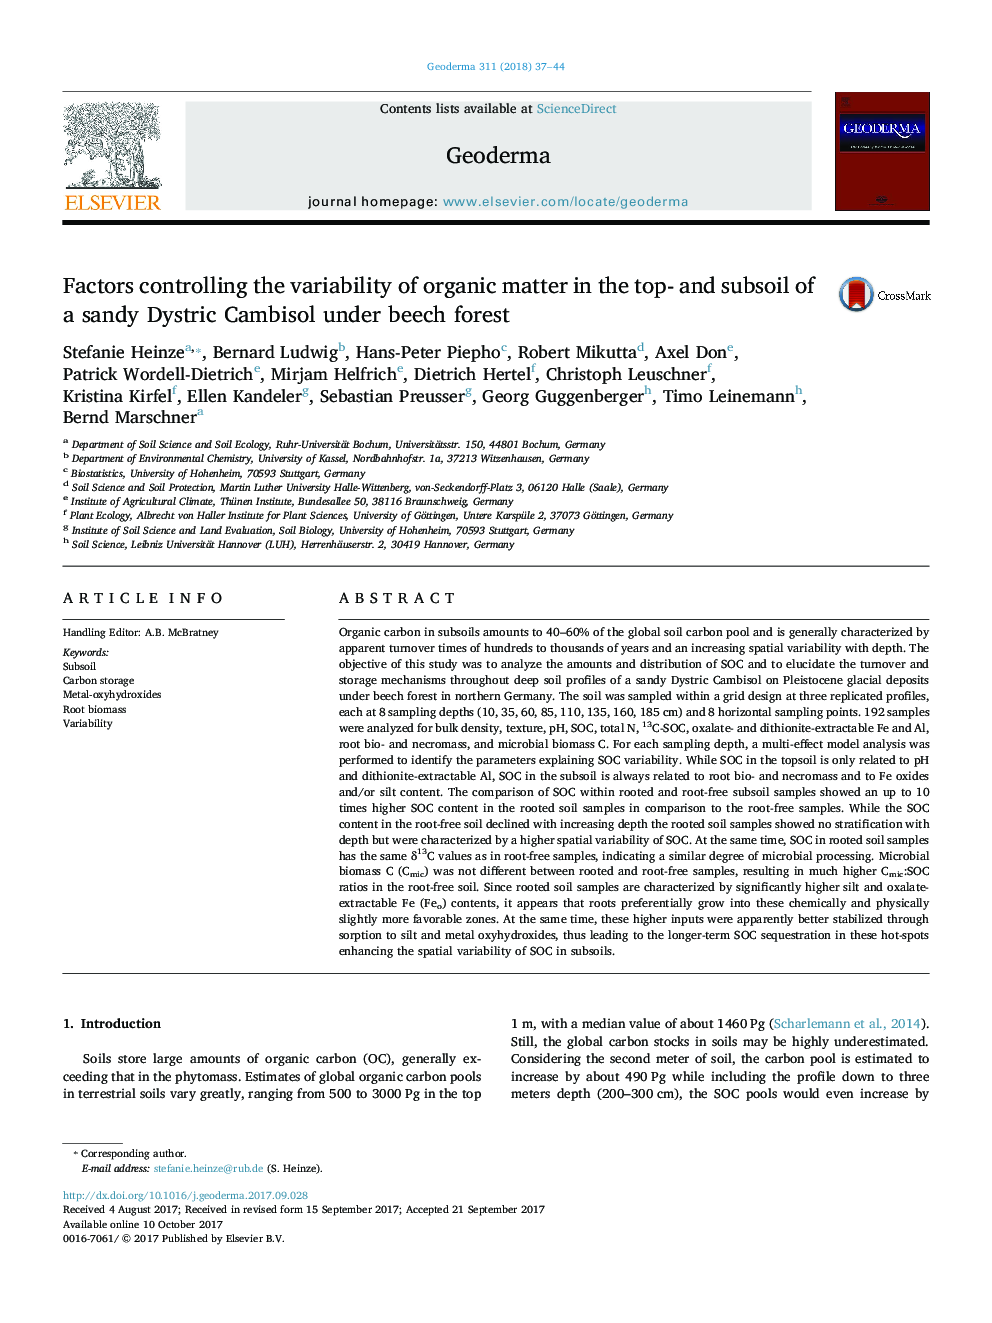 Factors controlling the variability of organic matter in the top- and subsoil of a sandy Dystric Cambisol under beech forest